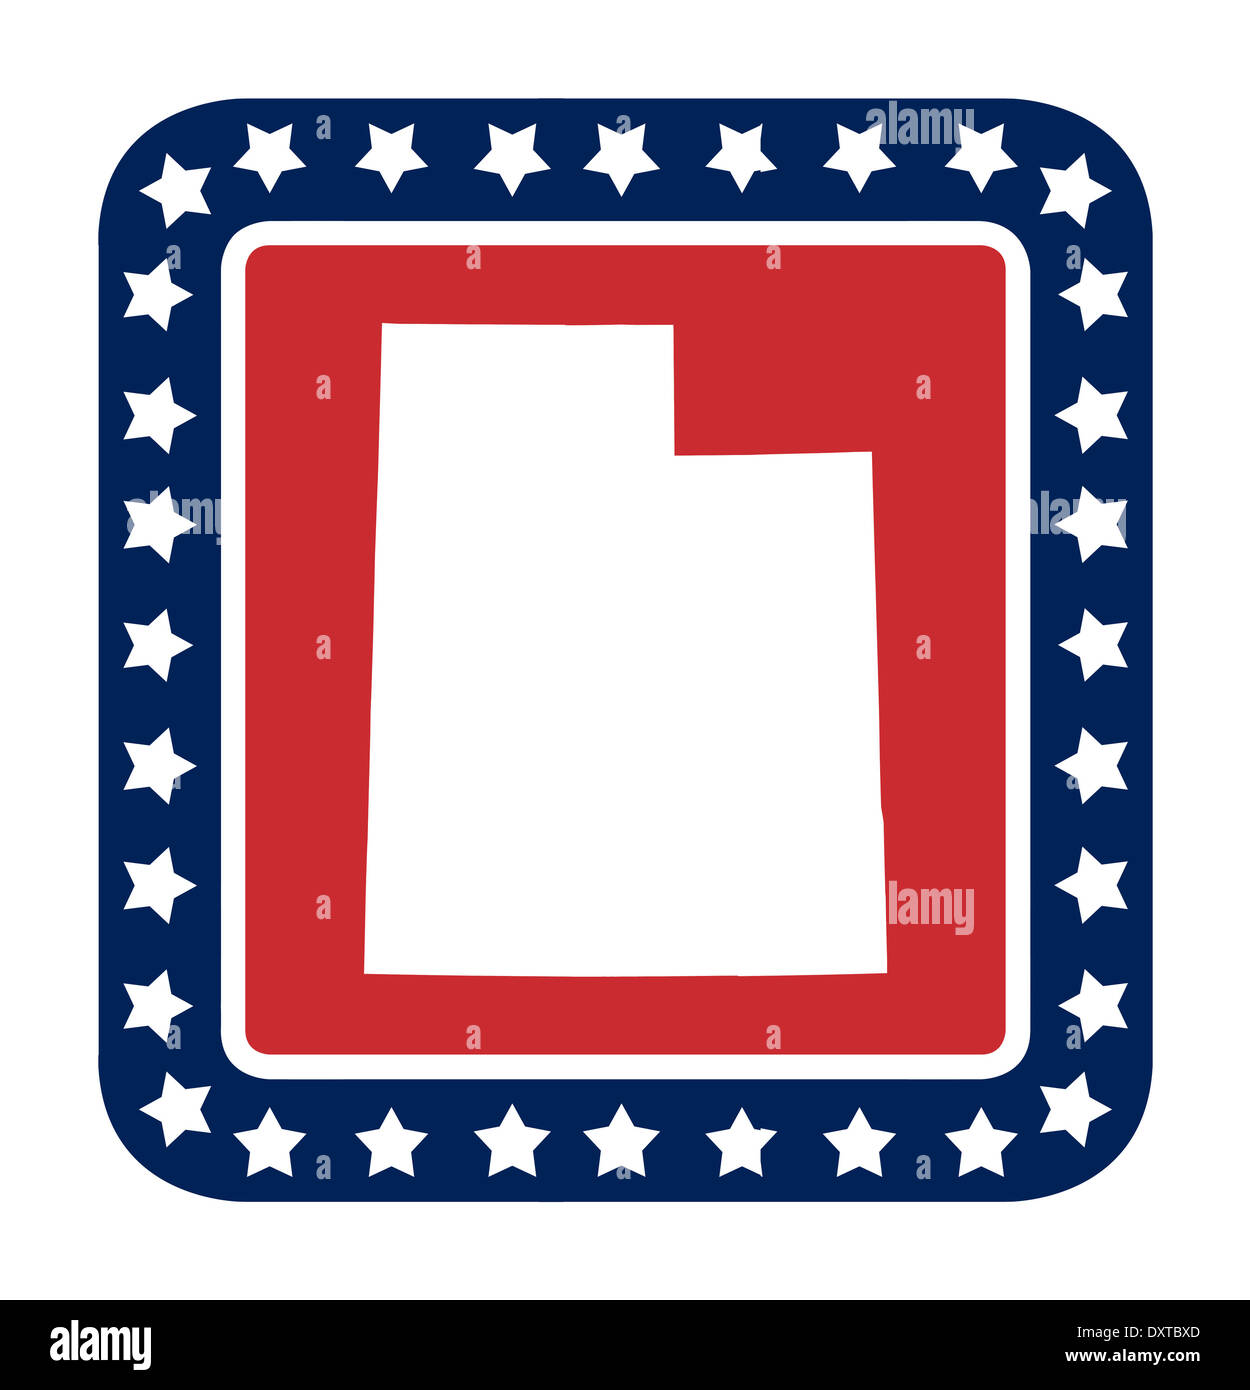 Utah state button on American flag in flat web design style, isolated on white background. Stock Photo